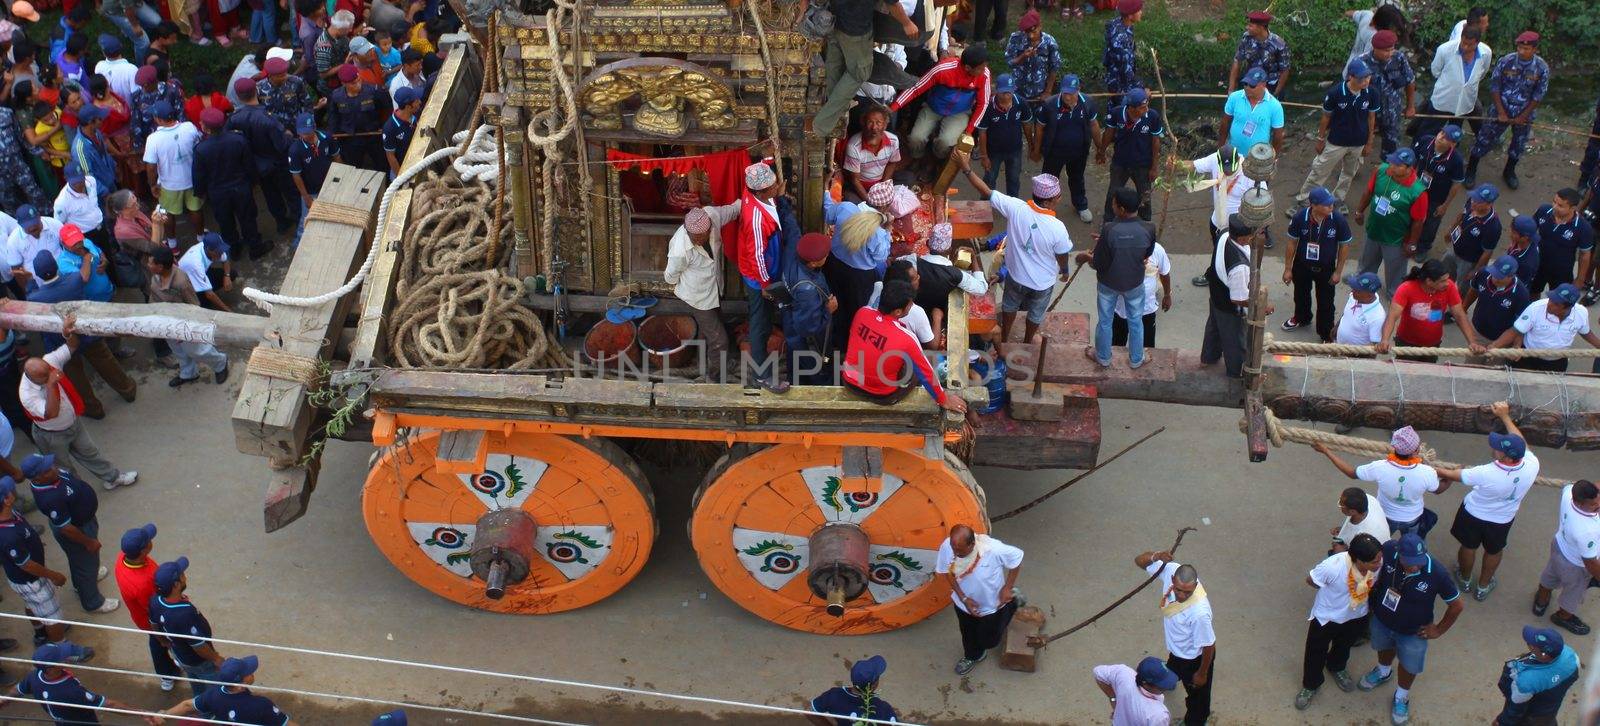 NEPAL, Patan: The restored chariot is prepped in Patan, Nepal as Hindu and Buddhist devotees celebrate the festival of rain god Rato Machindranath on September 22, 2015. The festival takes place each April, but was delayed this year after a devastating earthquake damaged the chariot that devotees pull through the area in the hope of securing a good harvest.